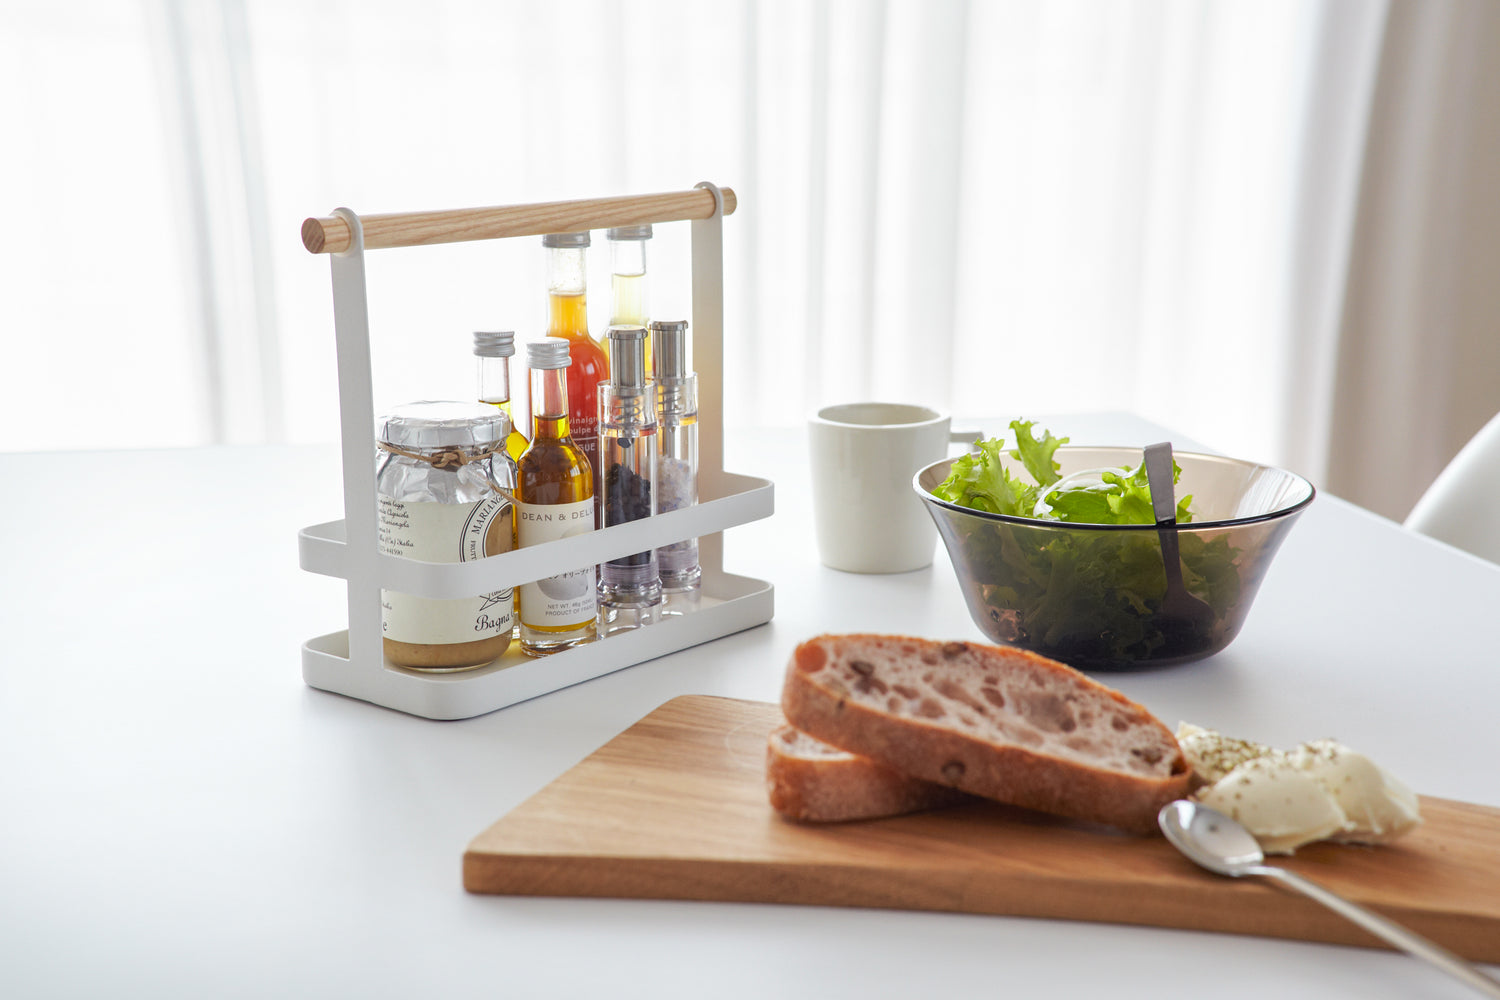 View 4 - White Countertop Storage Caddy holding spices and oil on dining table by Yamazaki Home.